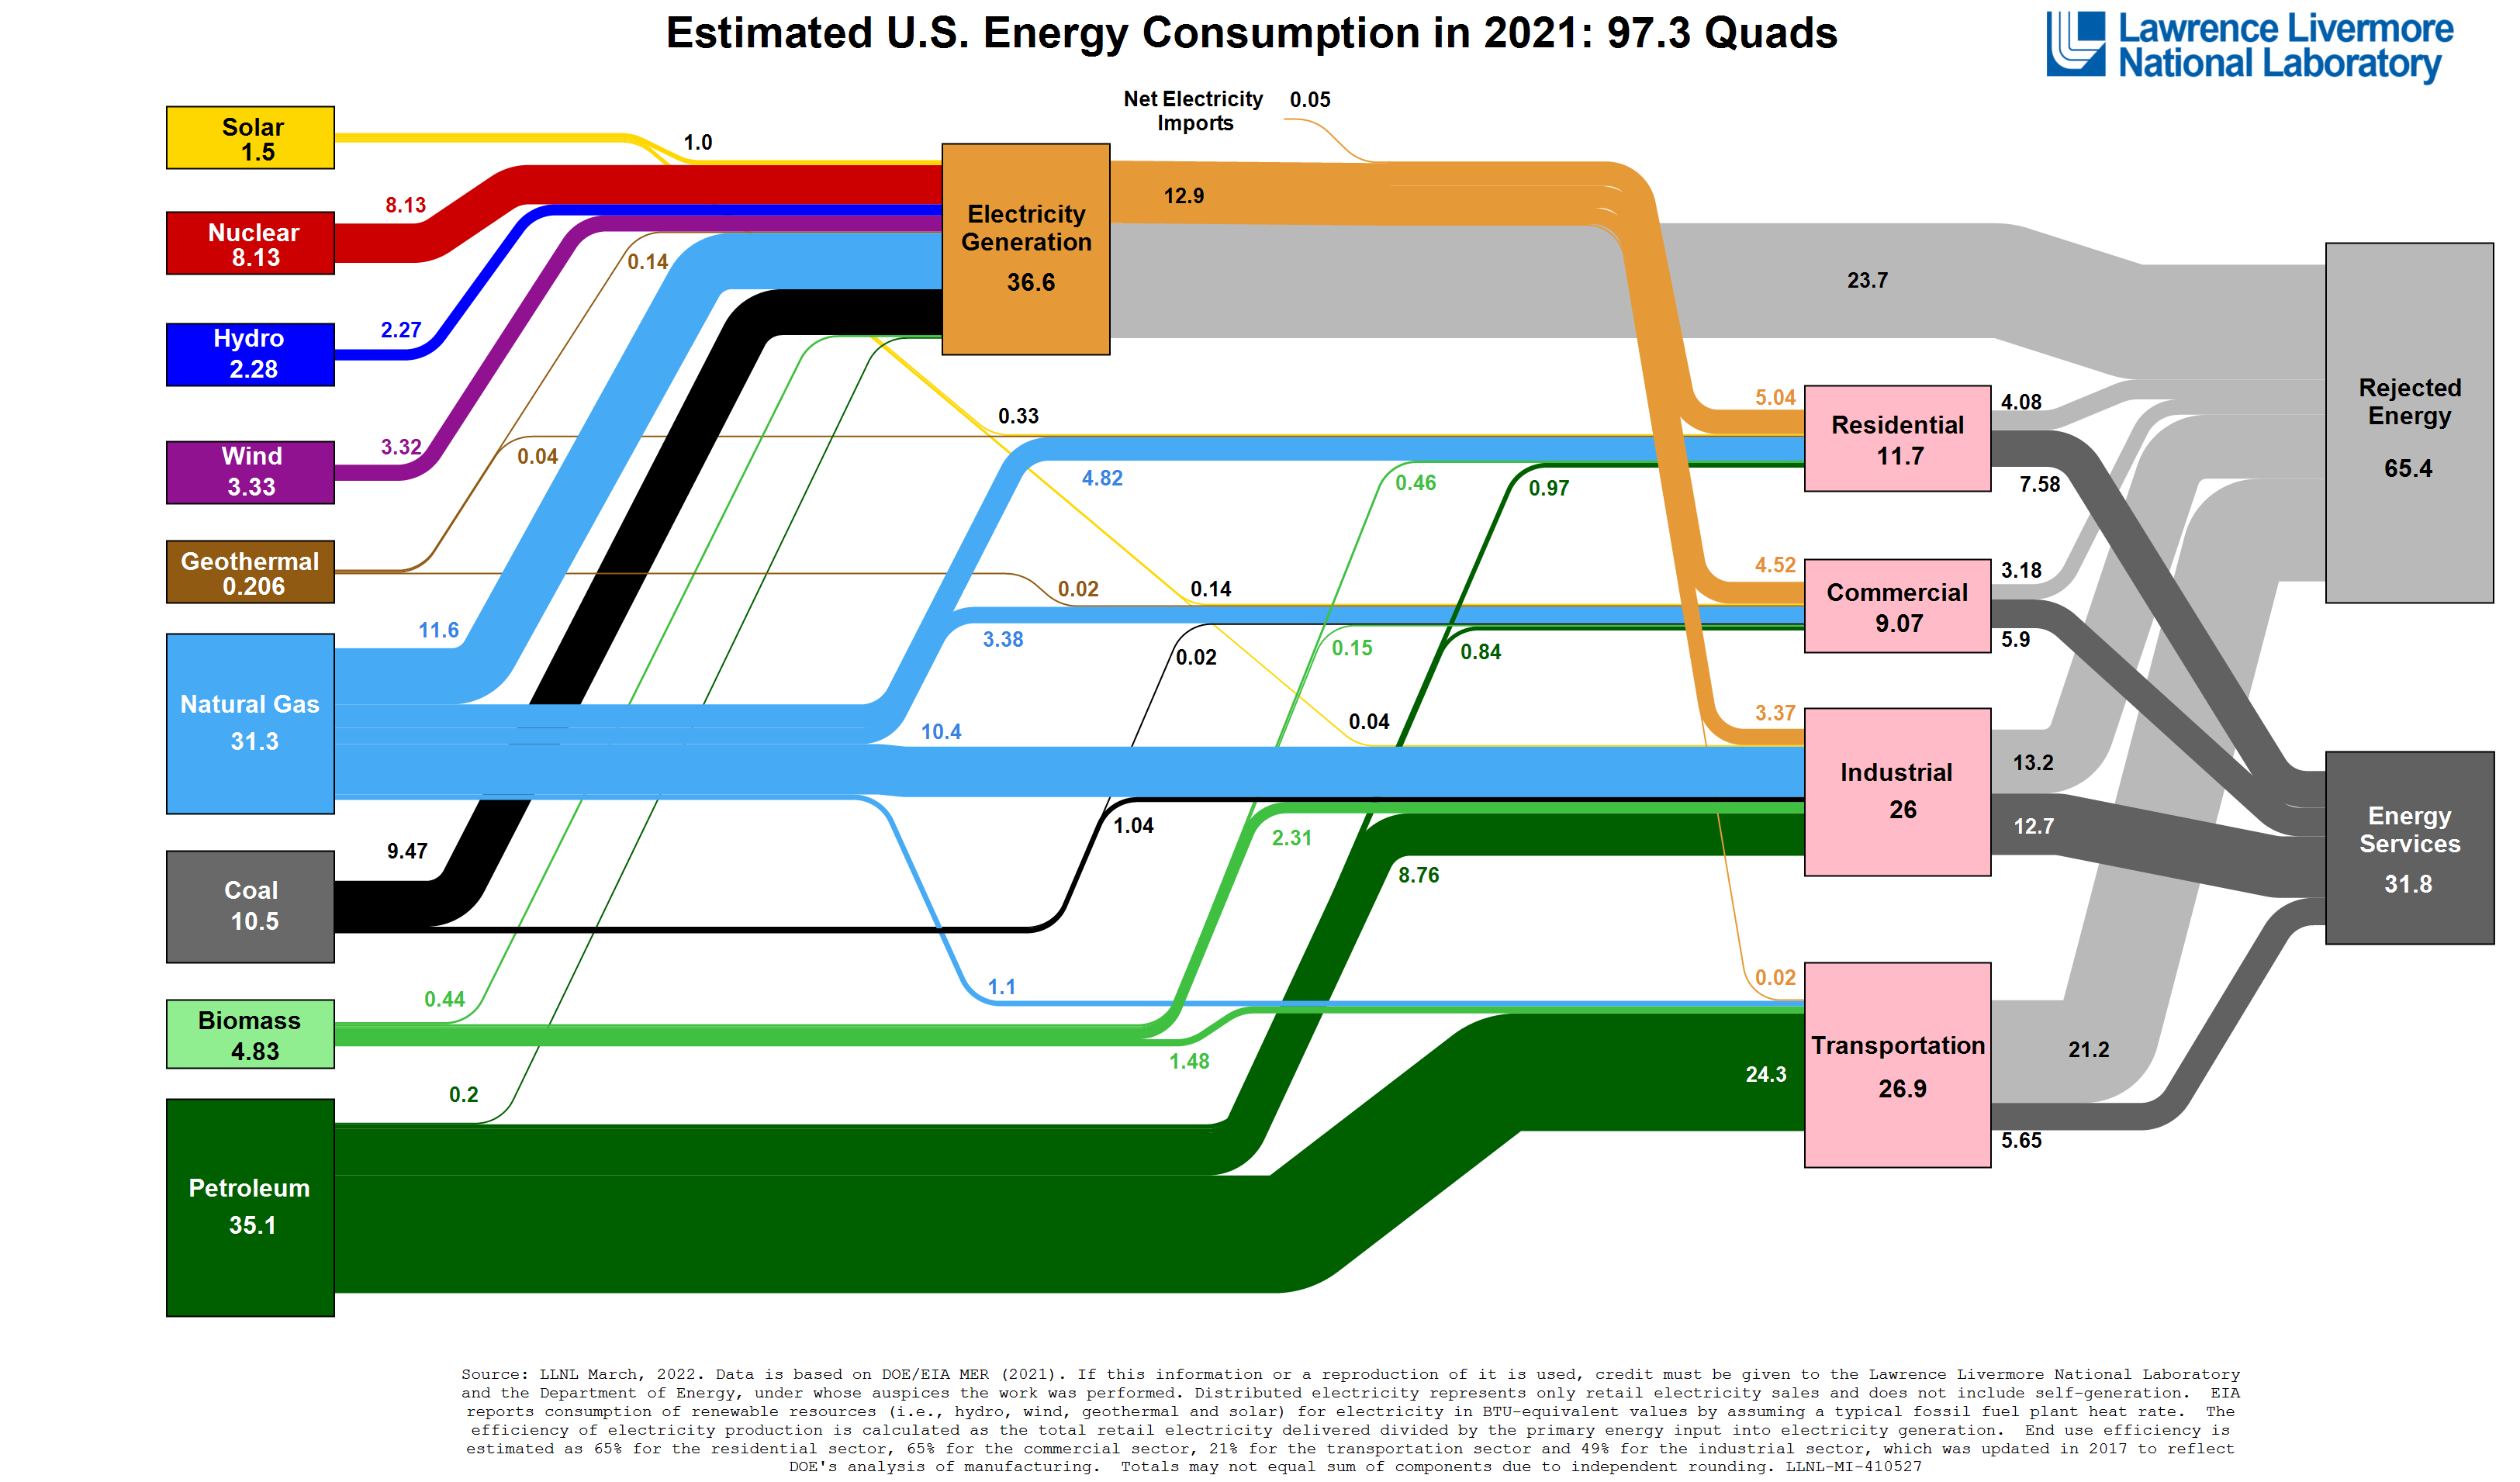 diagram of estimated energy use in the US in 2021 as described in the text